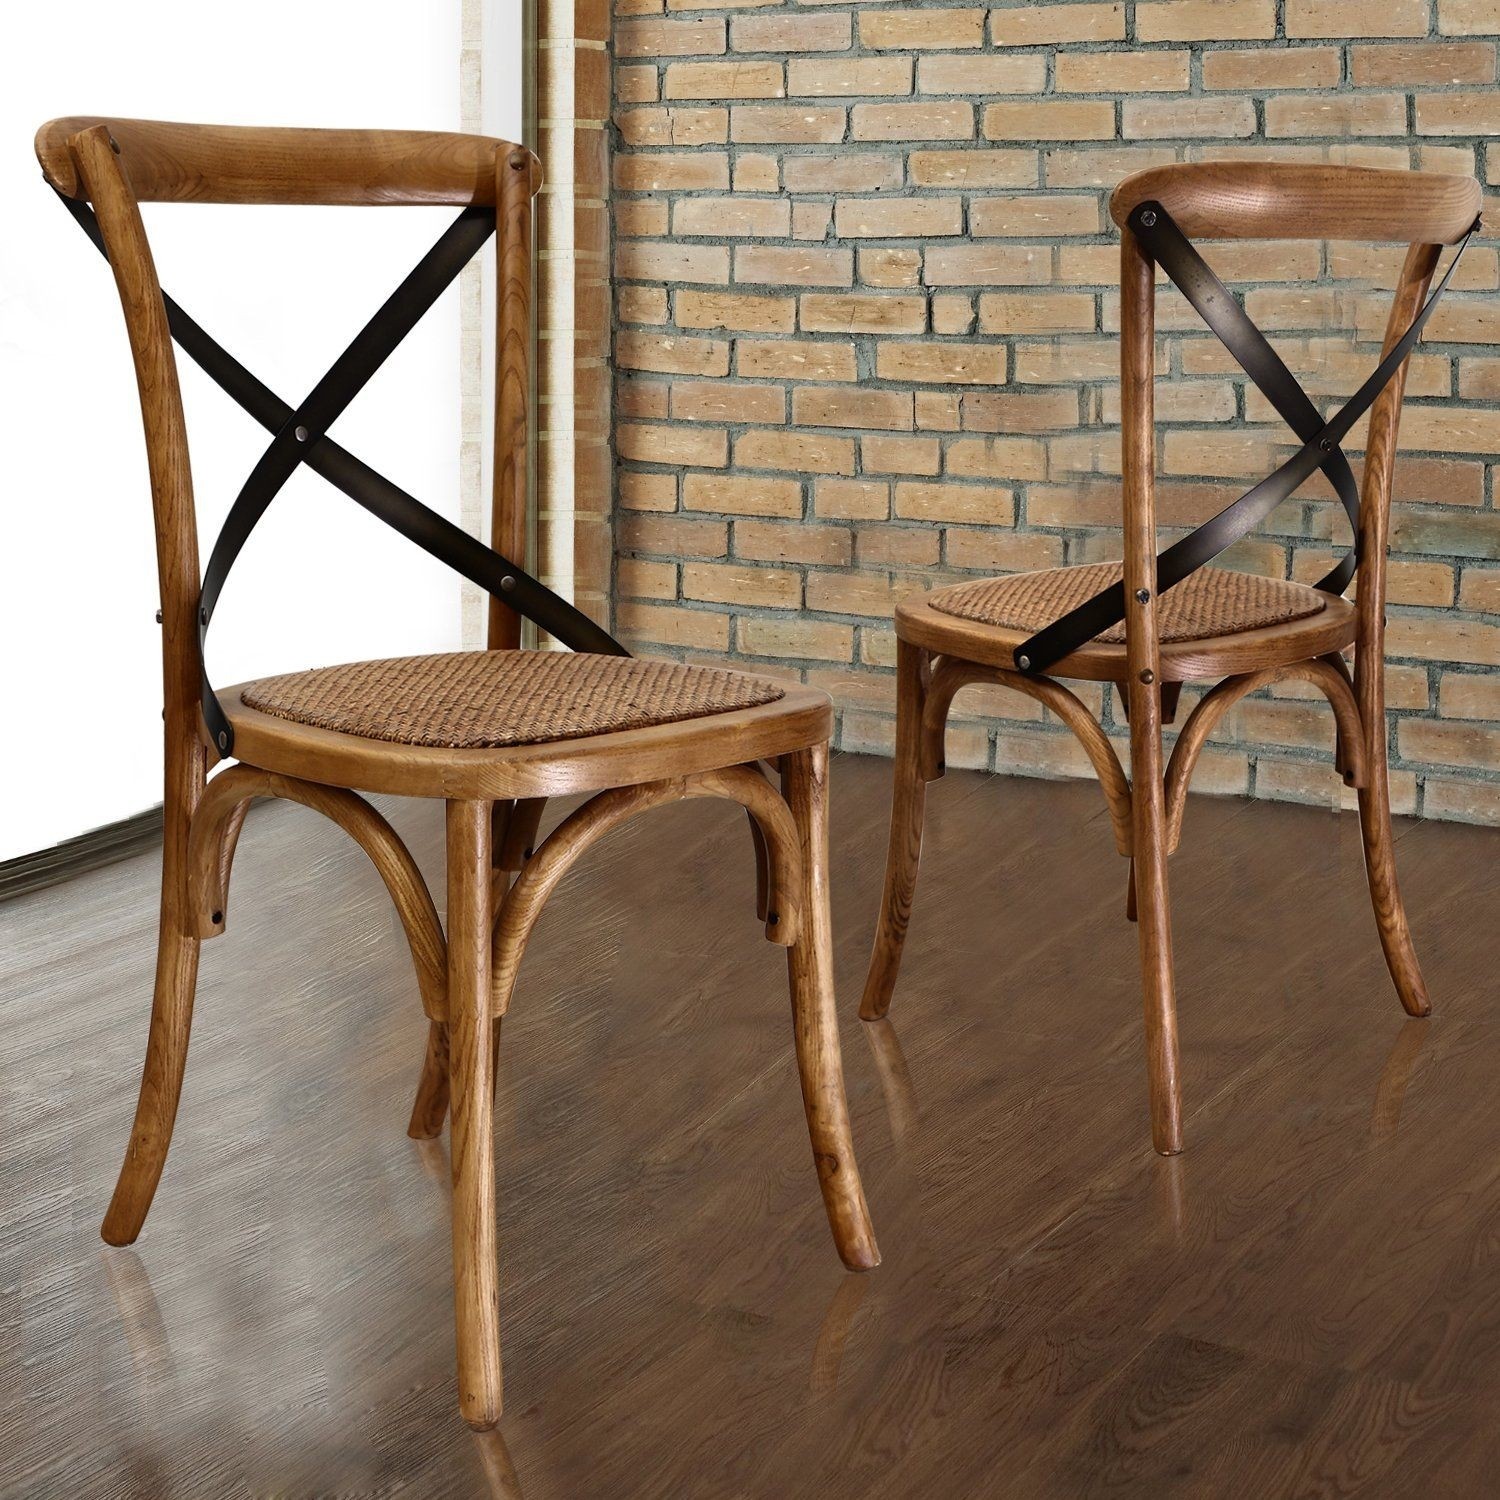 Joveco Vintage style solid wood cane seat dining chair - set of 2